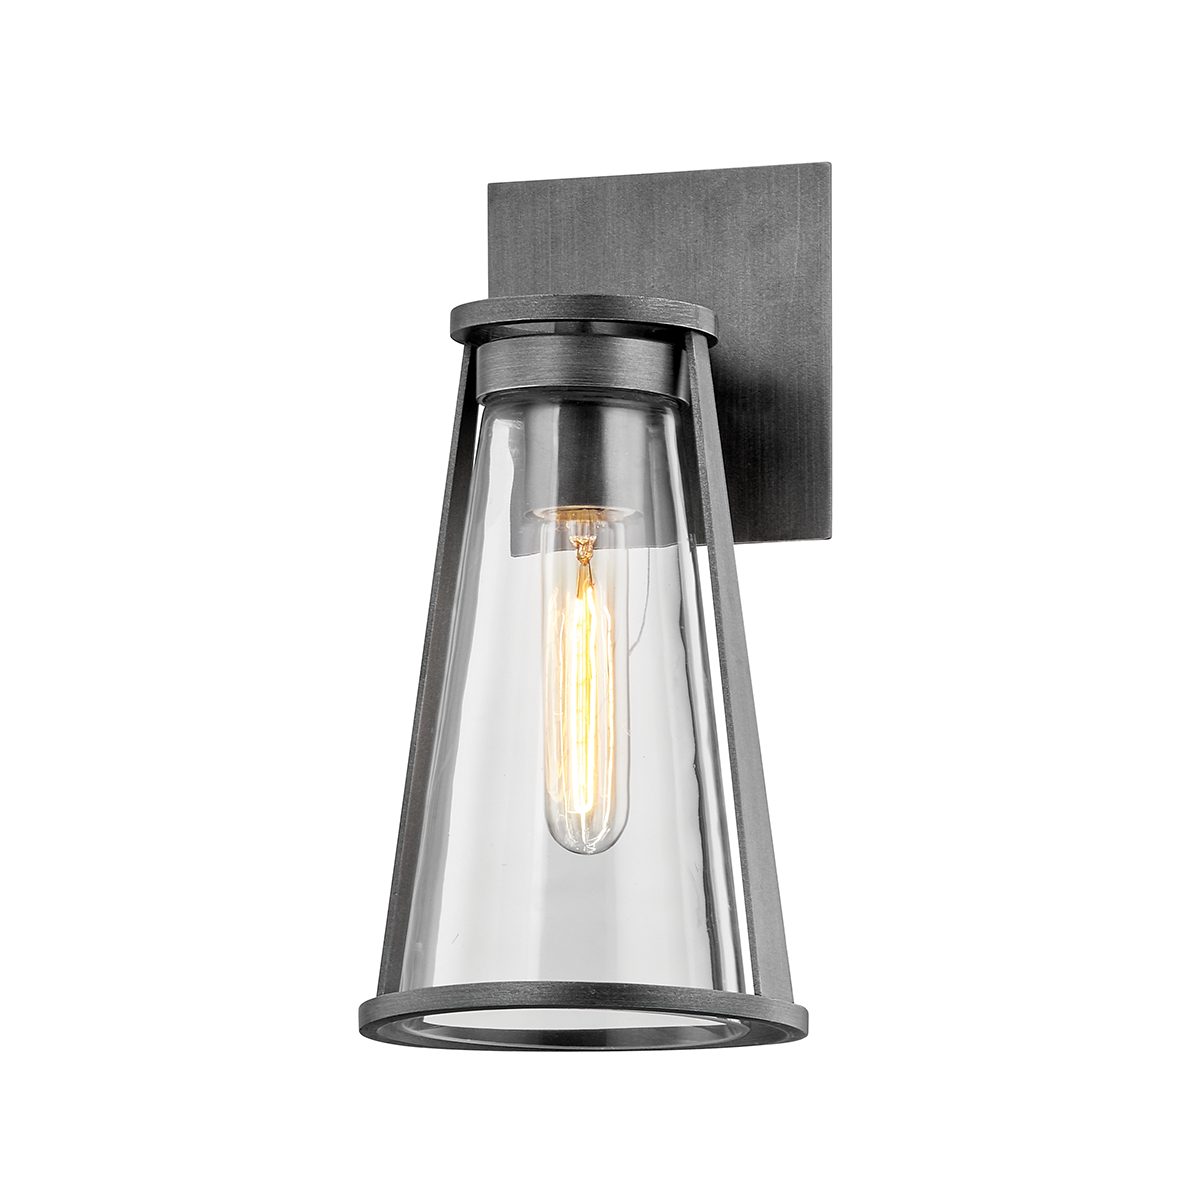 Troy Lighting PROSPECT 1LT WALL B7611 Outdoor l Wall Troy Lighting GRAPHITE  